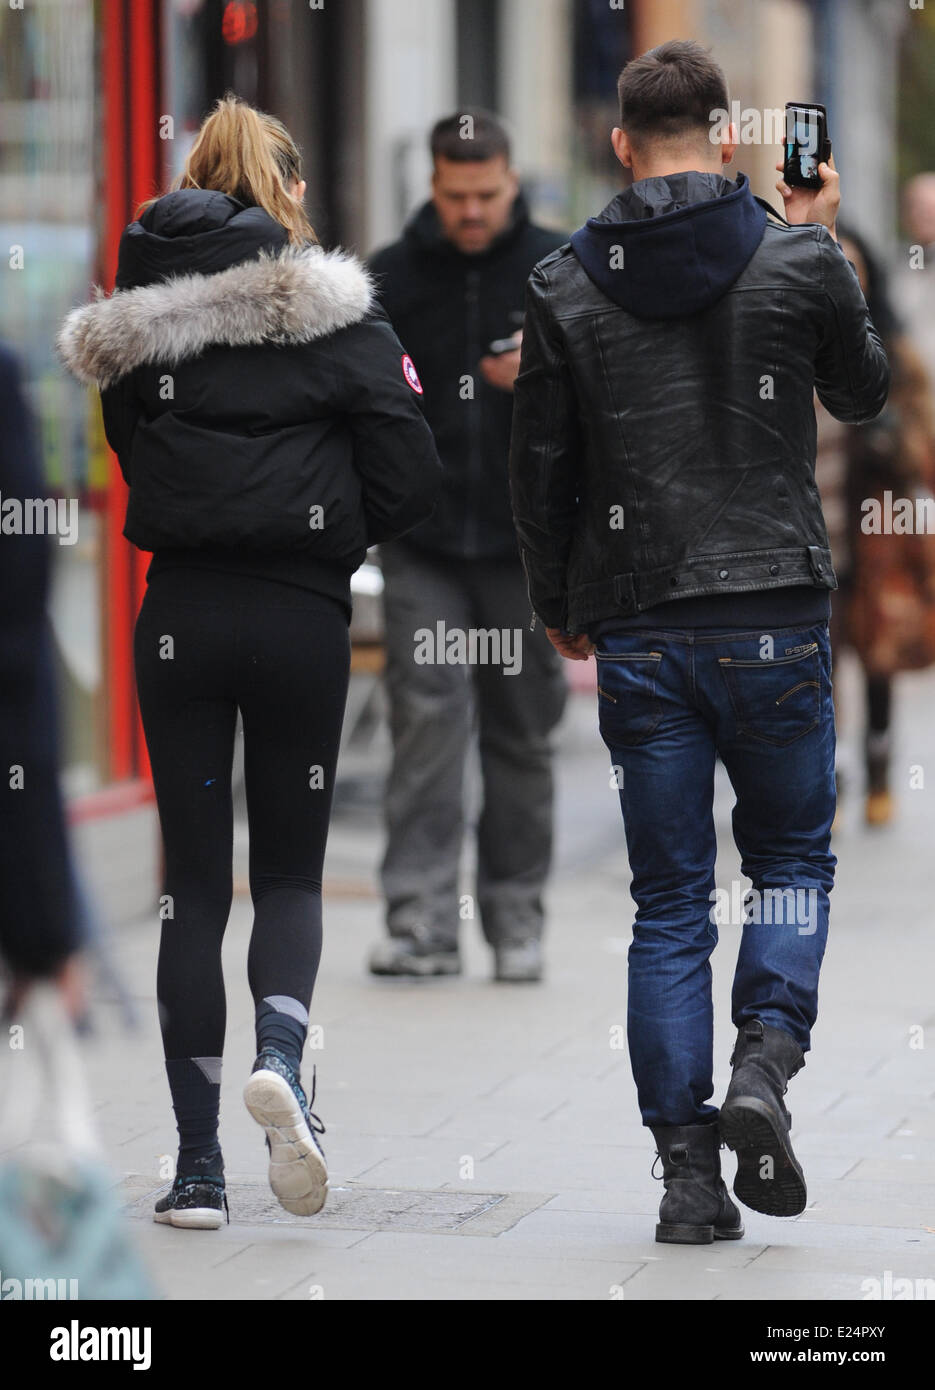 Abbey Clancy, Aljaz Skorjanec heading to rehearsals ahead of this weekend's Strictly Come Dancing final. London, England - 17.12.2013  Where: London, United Kingdom When: 17 Dec 2013 Stock Photo